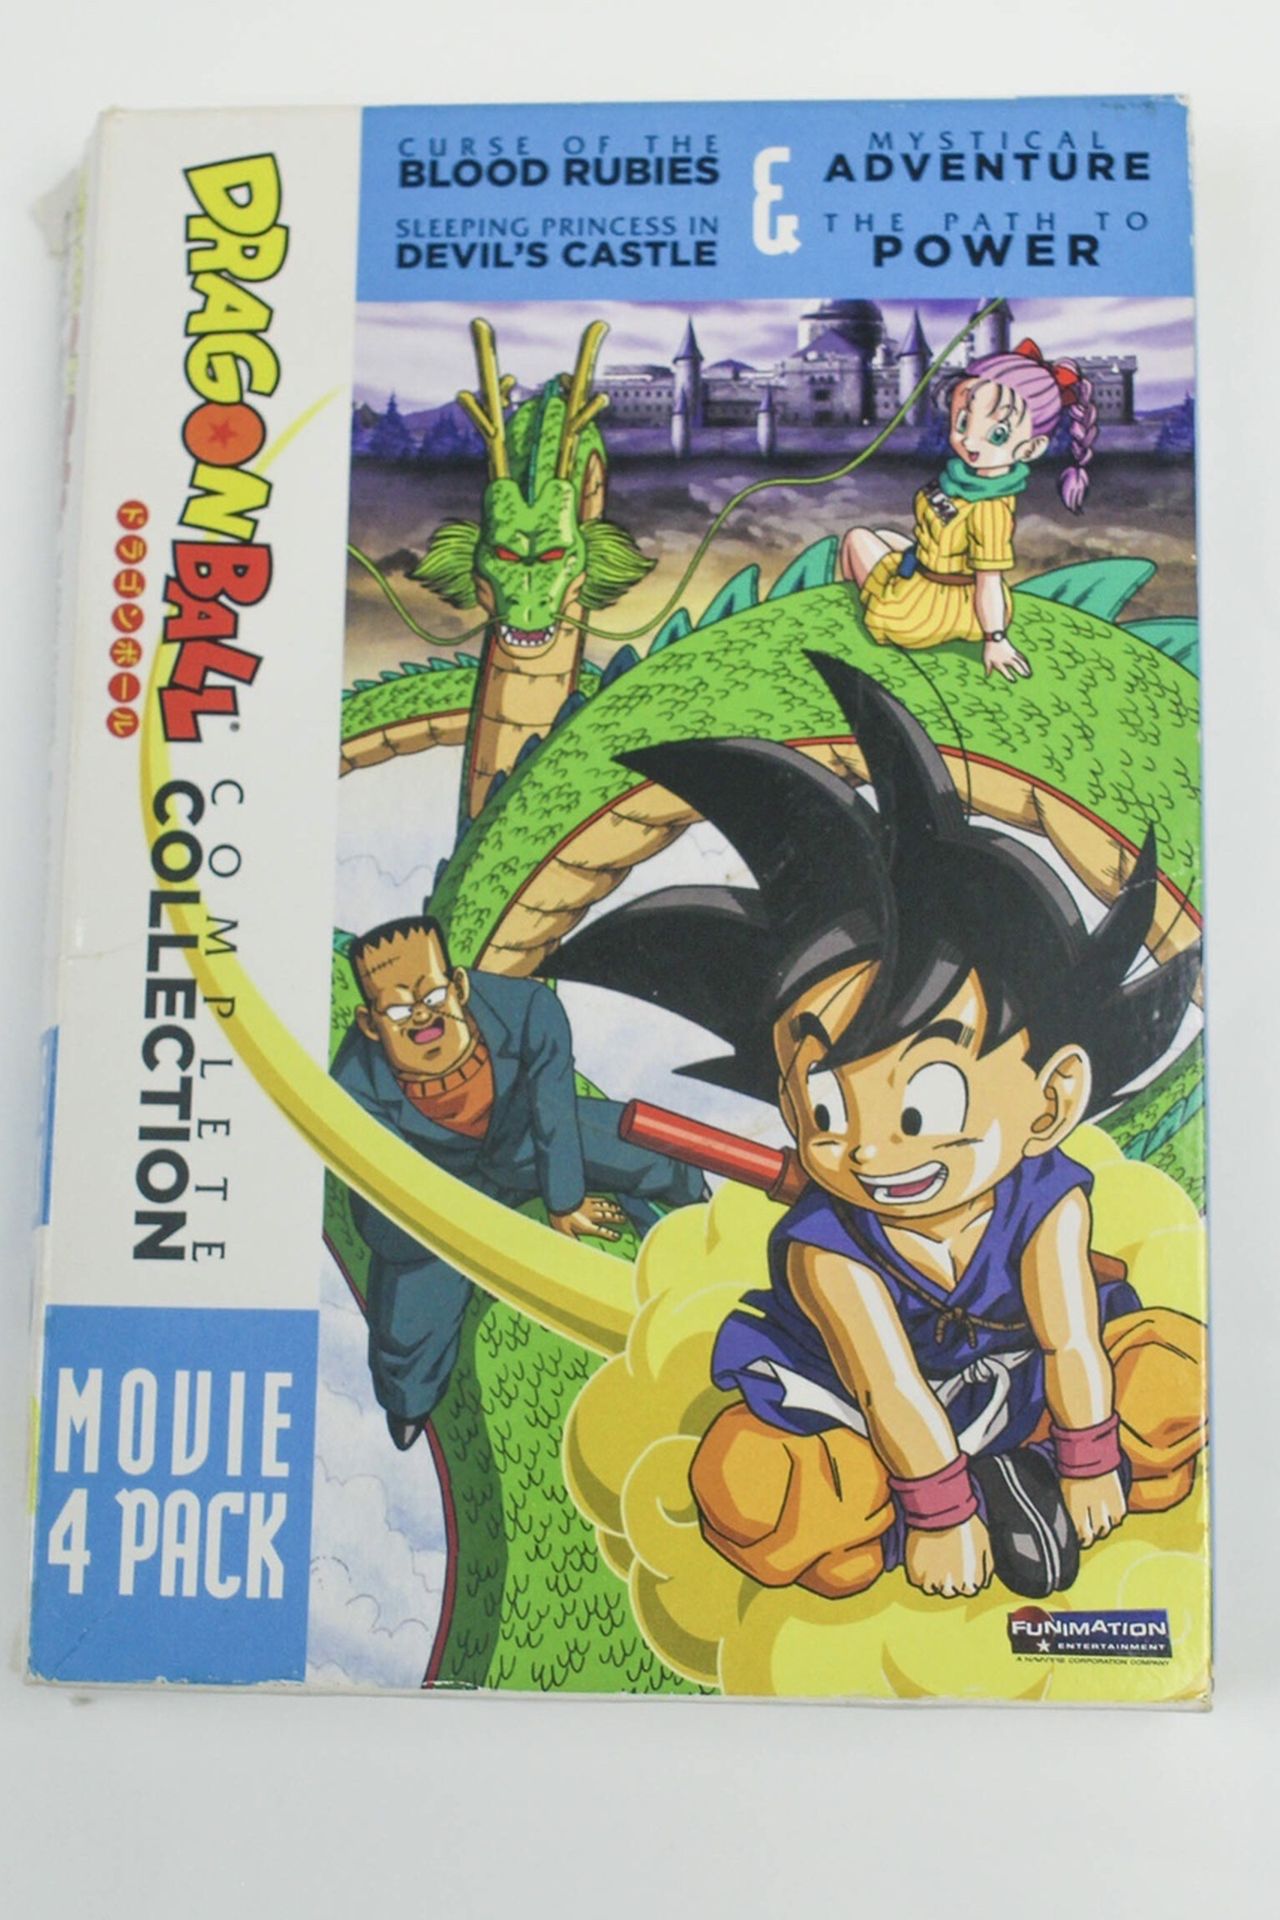 Dragonball Complete Collection: Movie 4 Pack (DVD, 2011, 4-Disc Set)